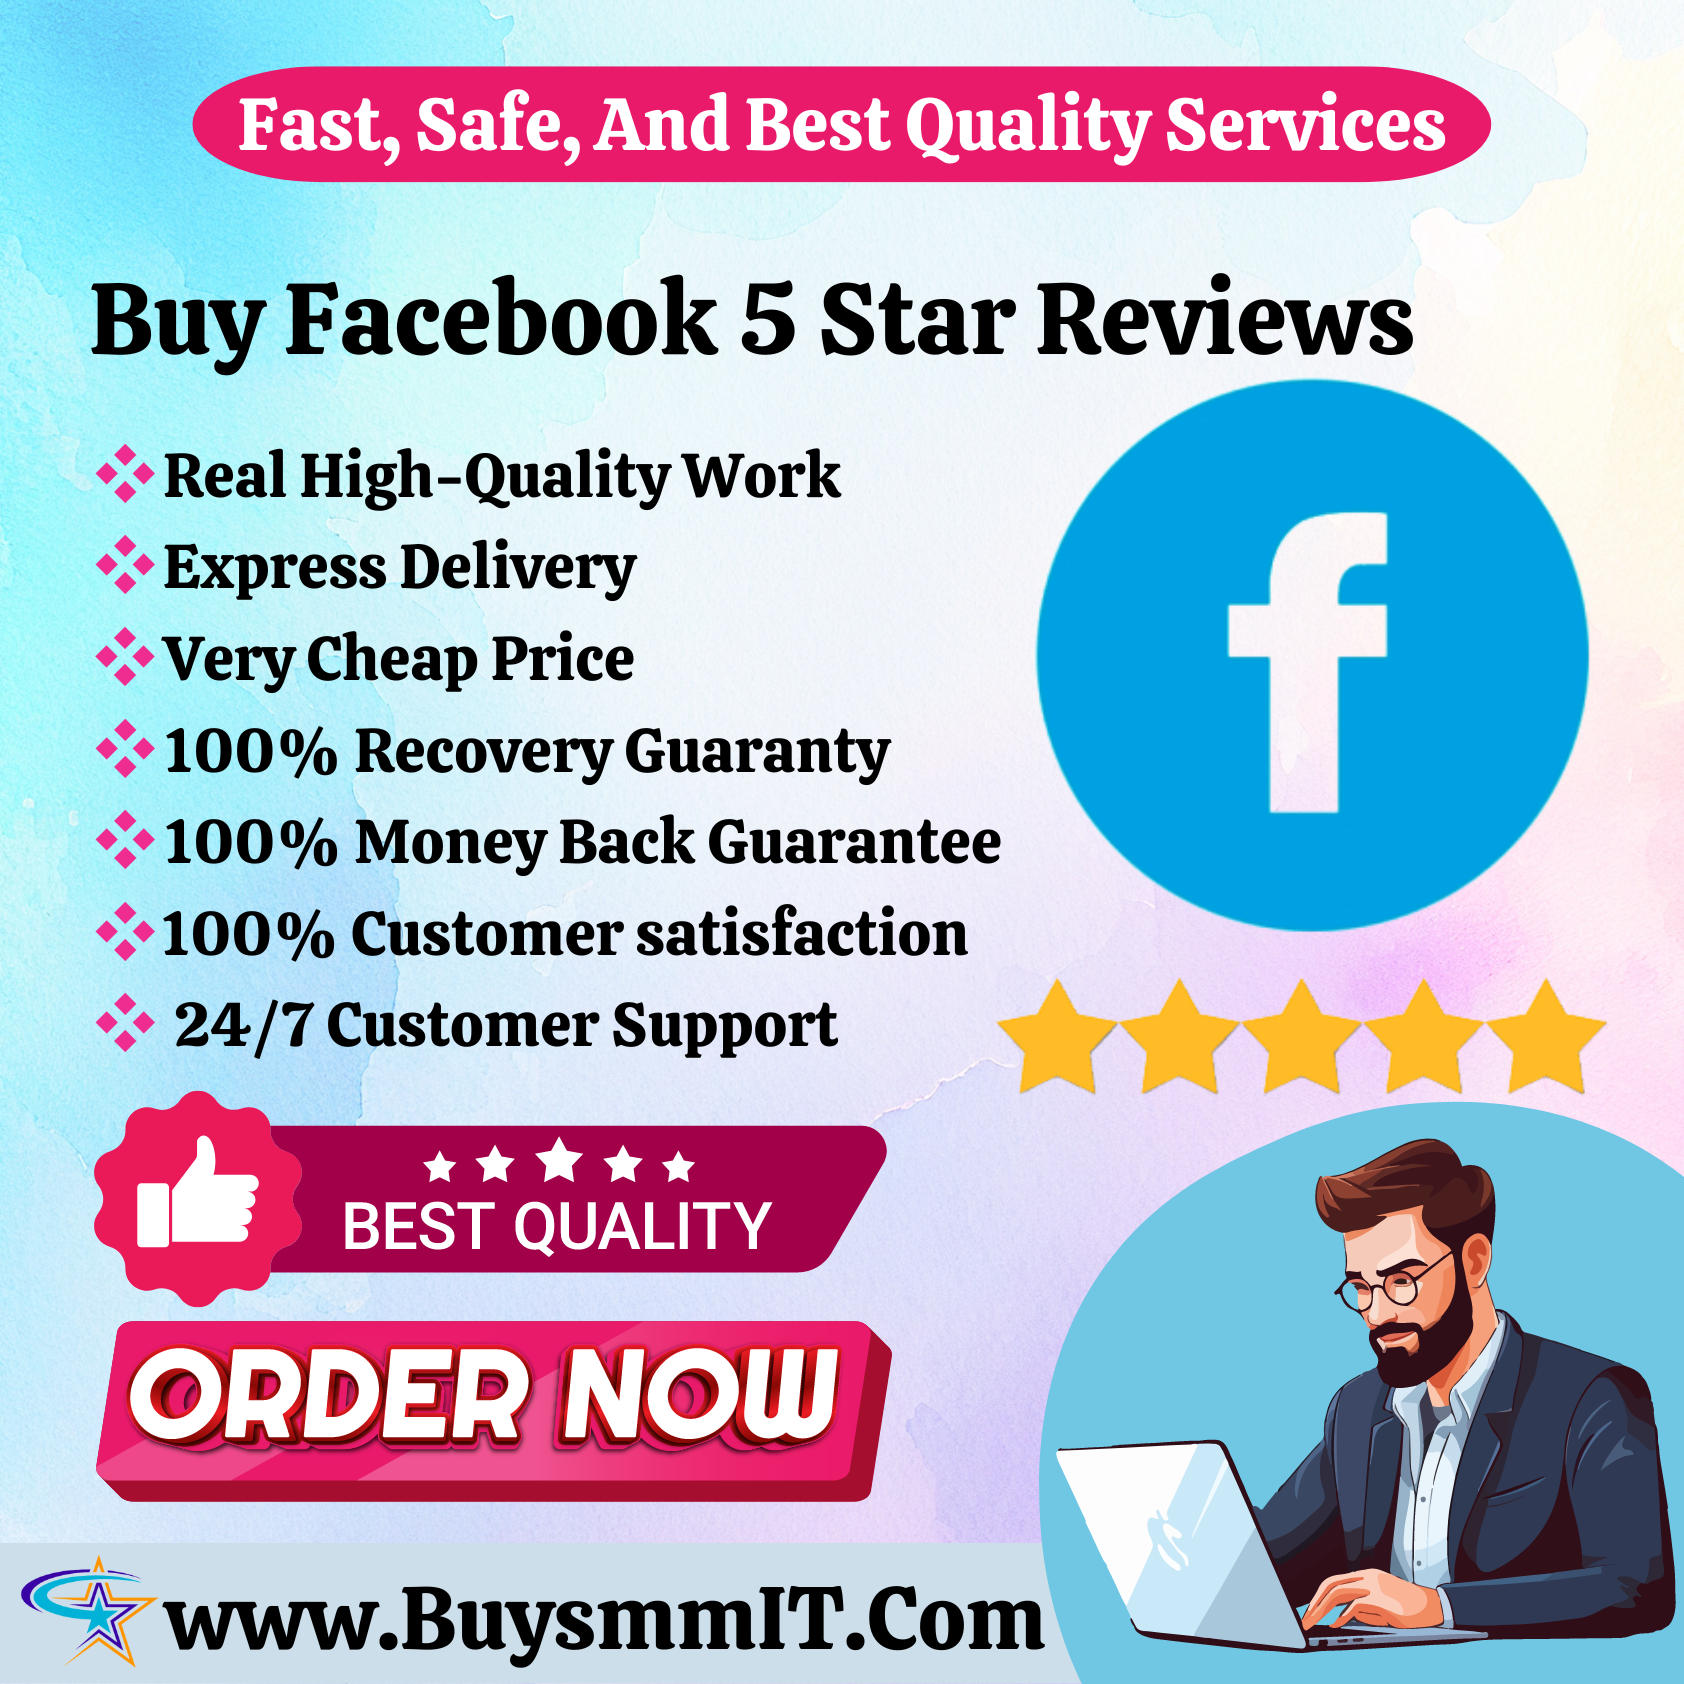 Buy Facebook 5 Star Reviews - Best 5 Star Review Services